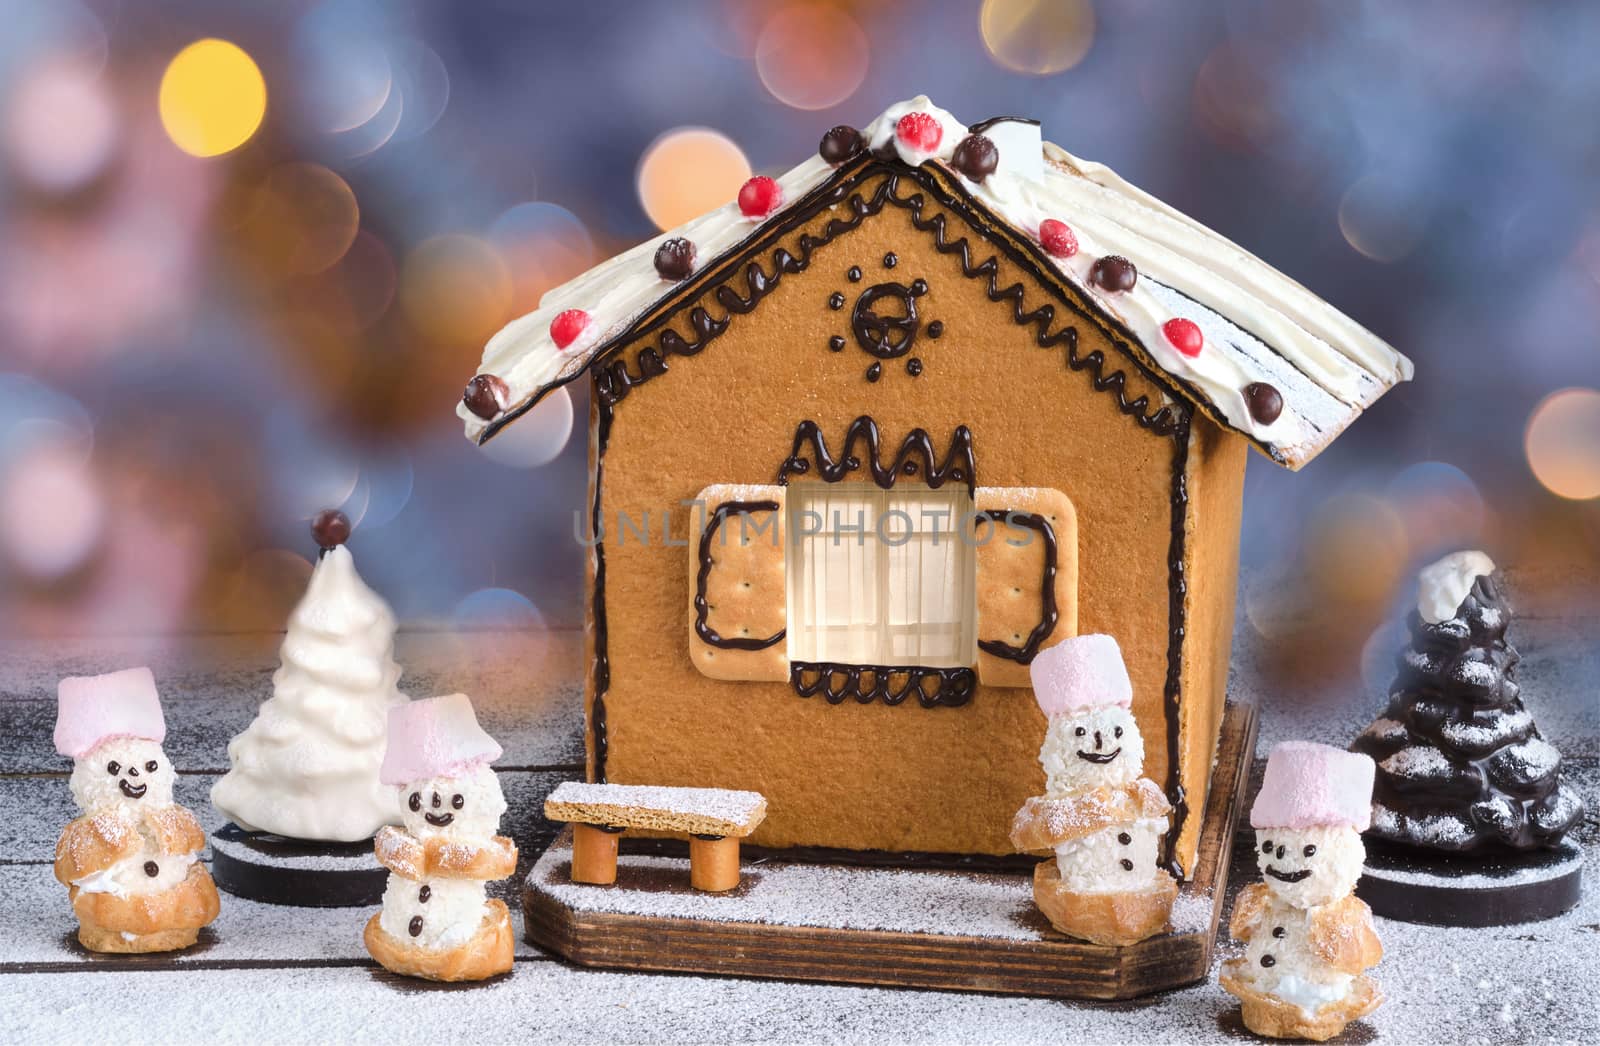 Christmas cake in the shape of the house, chocolate Christmas tree and sweet snowmen. On a wooden surface dusted with powdered sugar, colorful bokeh on the background